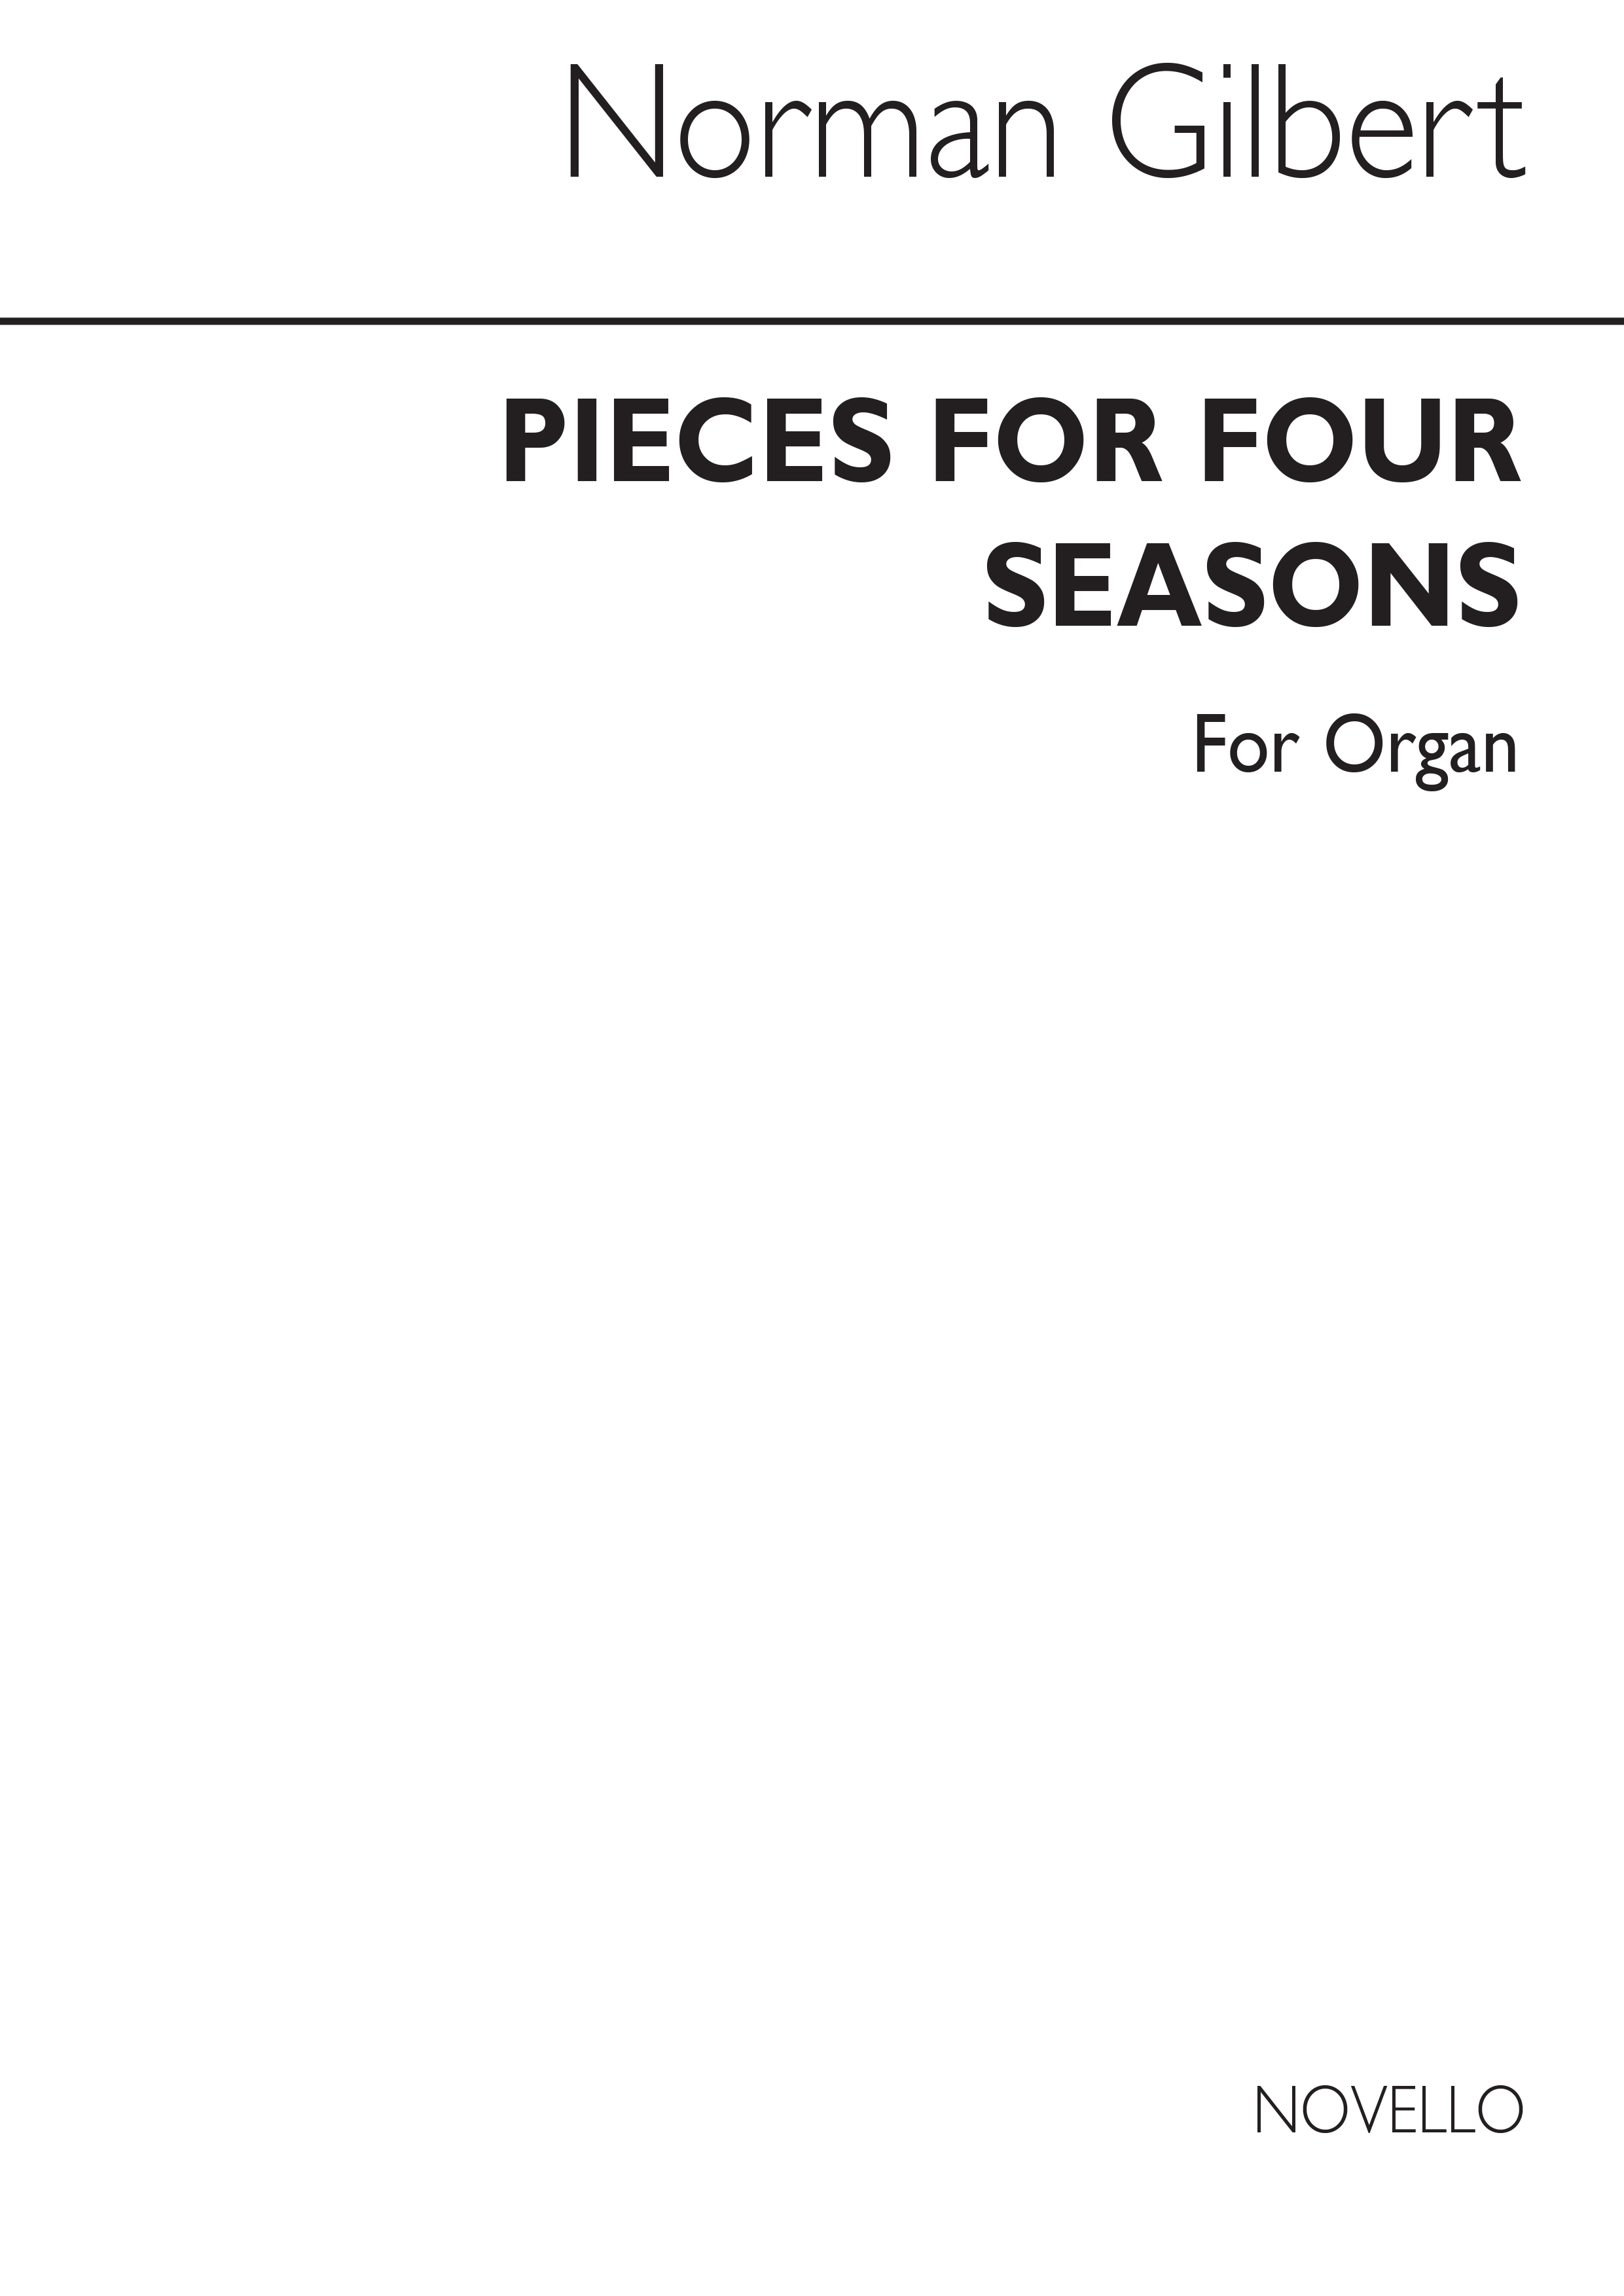 Norman Gilbert: Pieces For Four Seasons For Organ